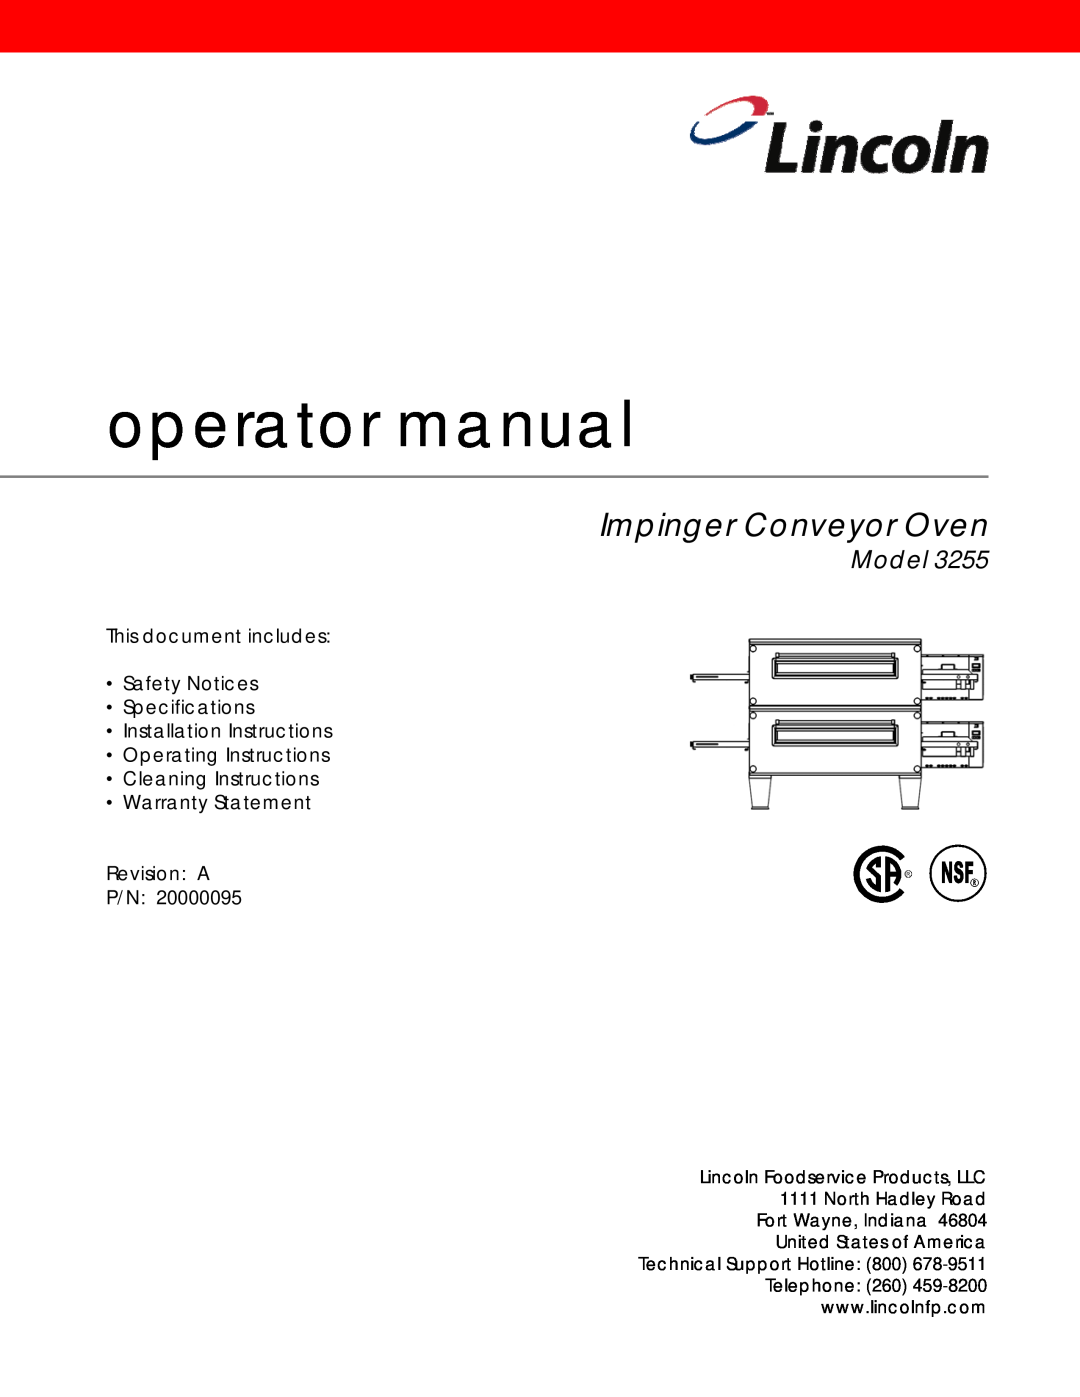 Lincoln 3255 specifications operator manual, Impinger Conveyor Oven, Model, This document includes Safety Notices 